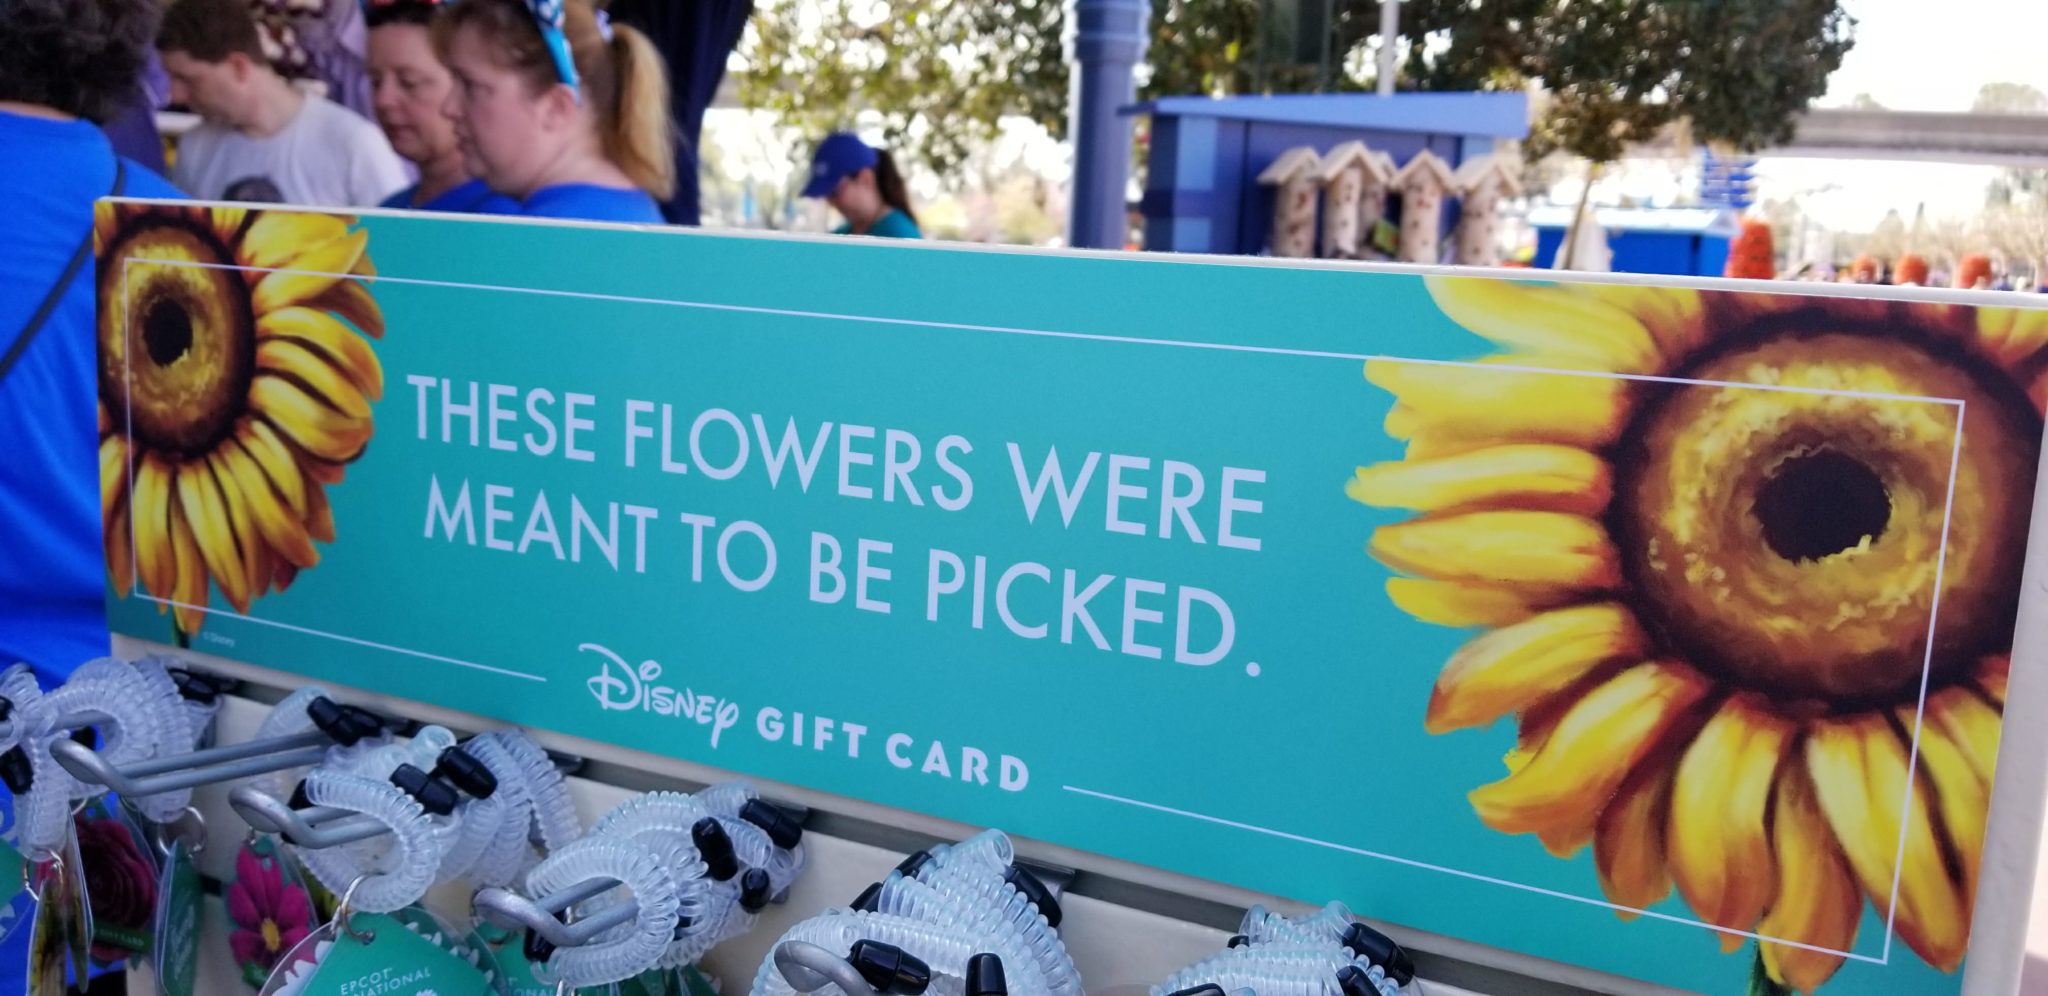 Adorable Gift Cards Are ‘Blooming’ at The Flower & Garden Festival!